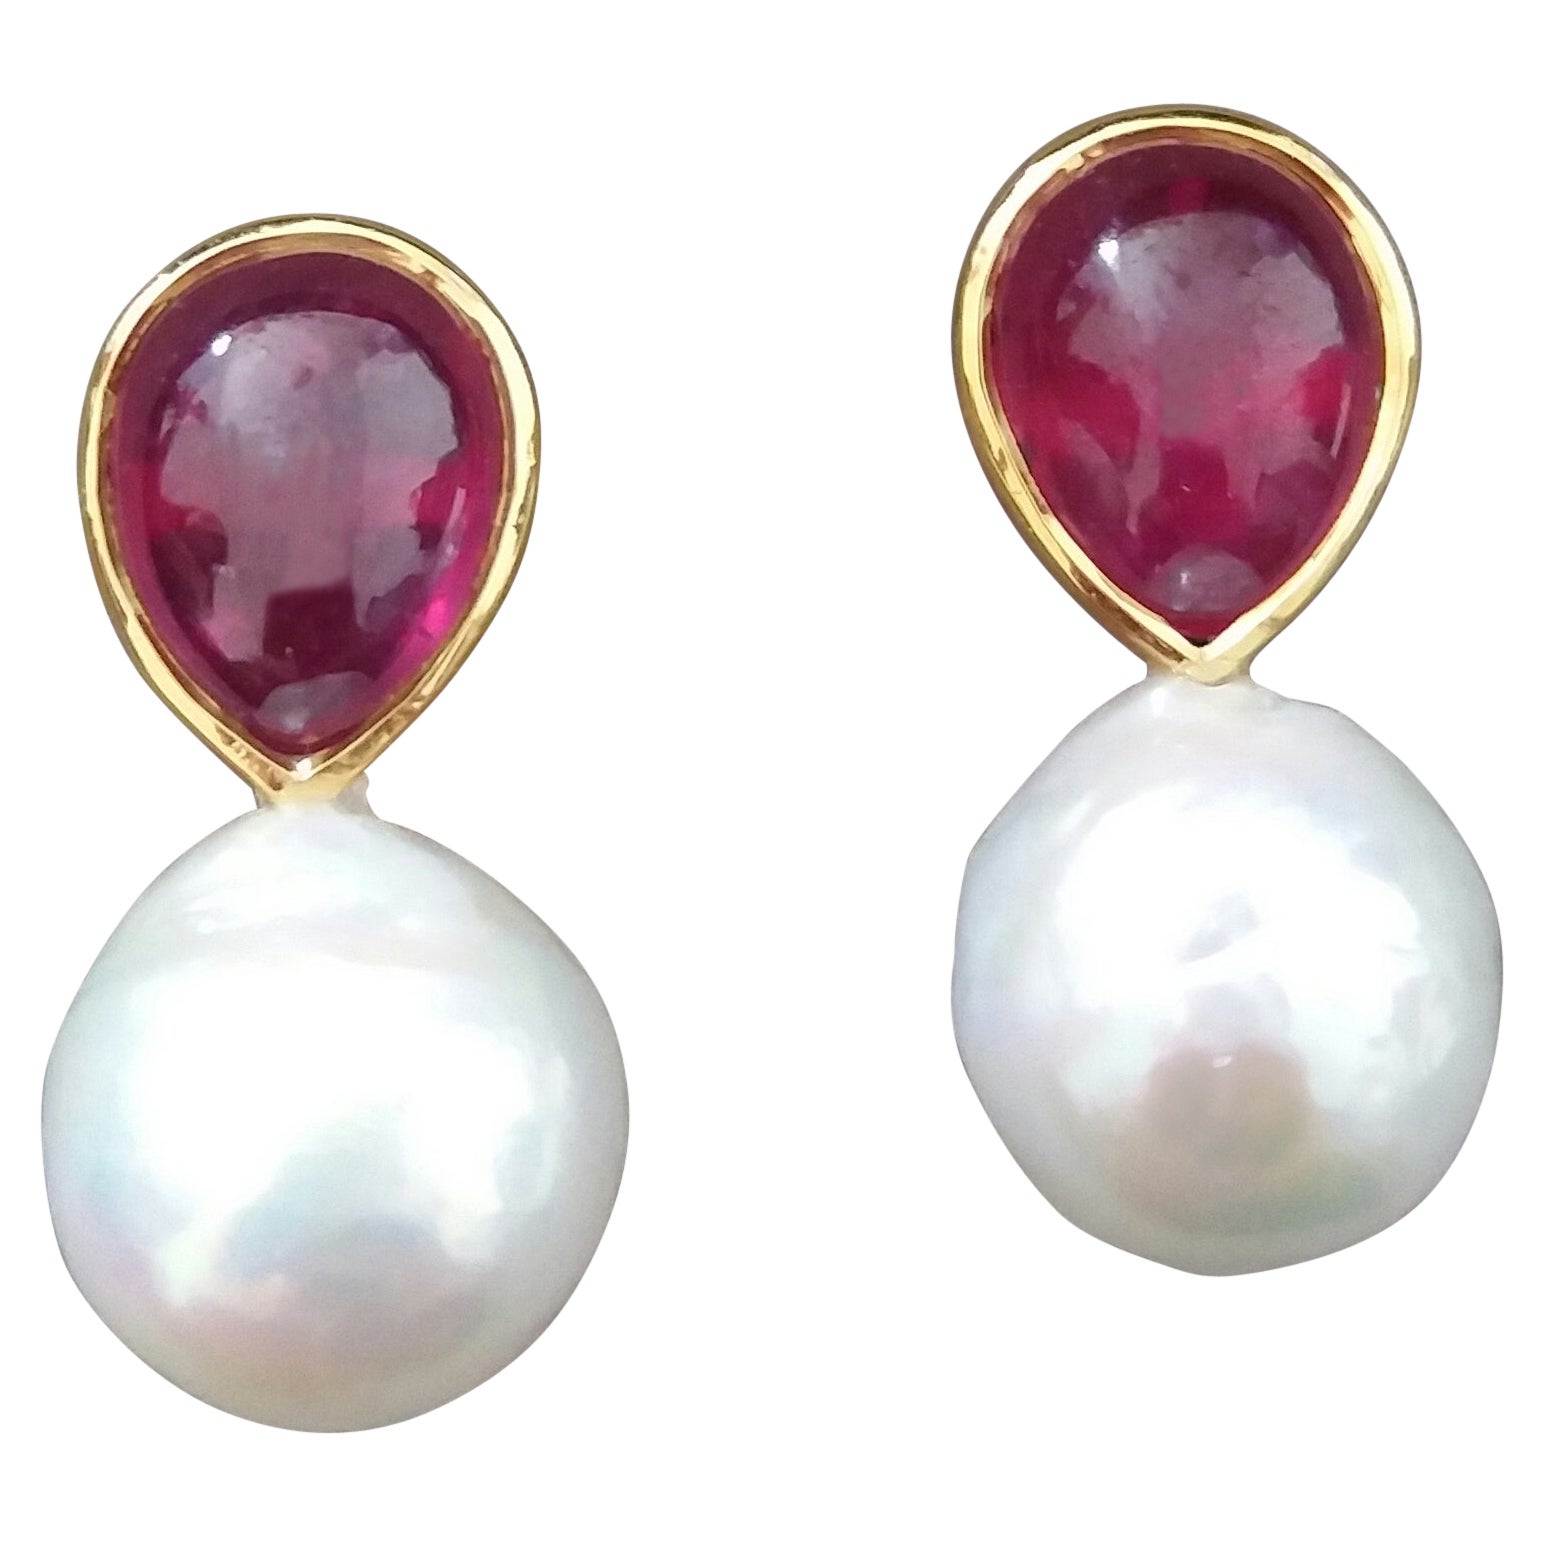 White Baroque Pearls Pear Shape Ruby Cabs 14 Kt Yellow Gold Bezel Stud Earrings